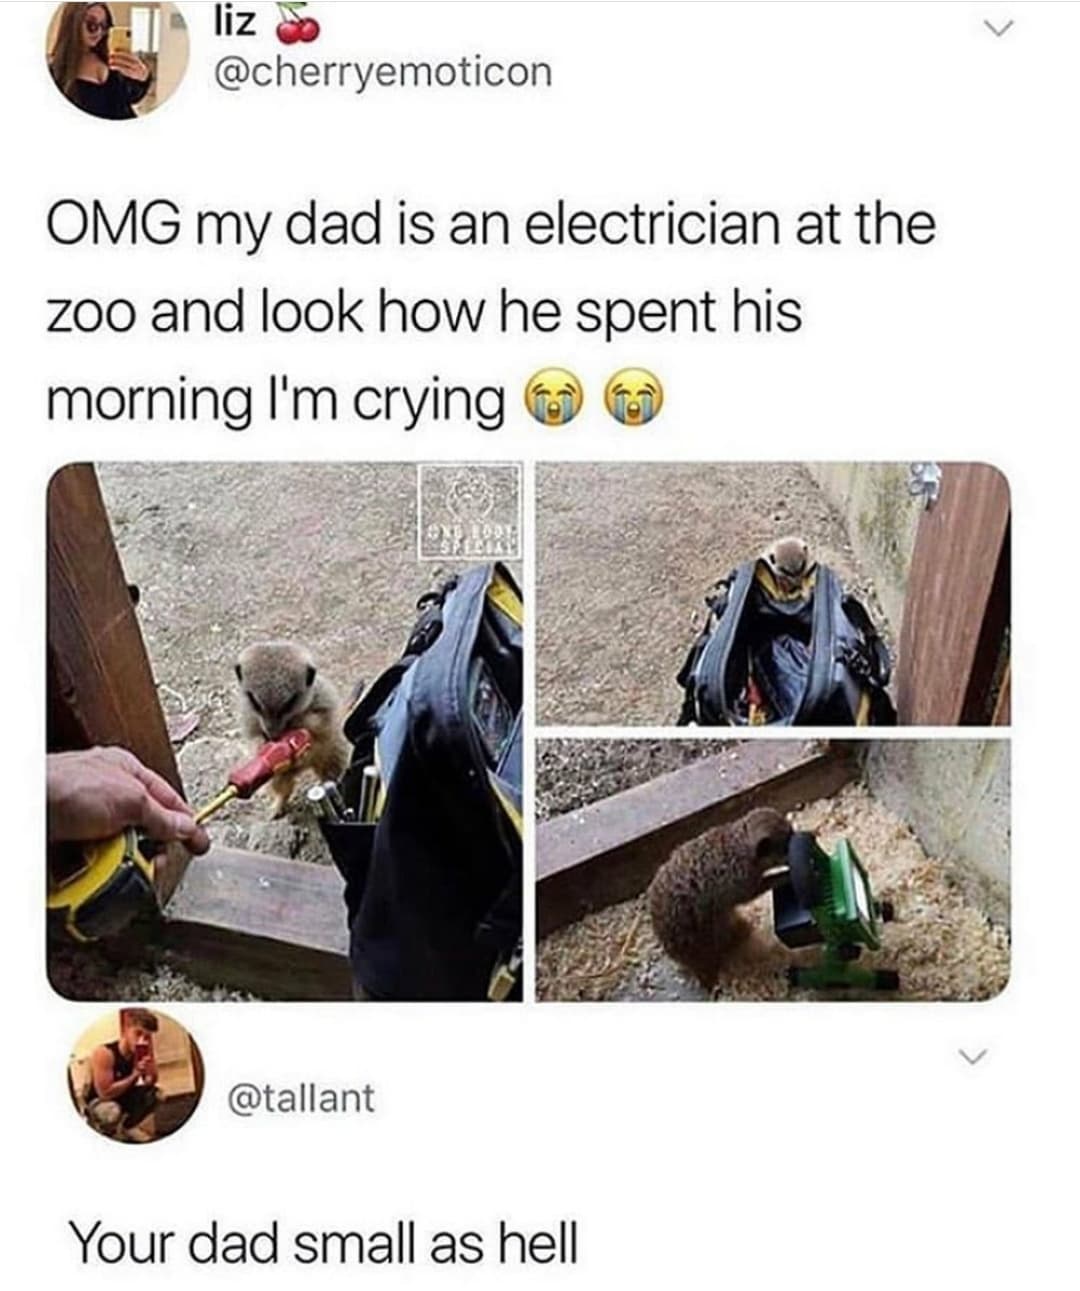 my dad is an electrician at a zoo - liz Omg my dad is an electrician at the zoo and look how he spent his morning I'm crying Your dad small as hell